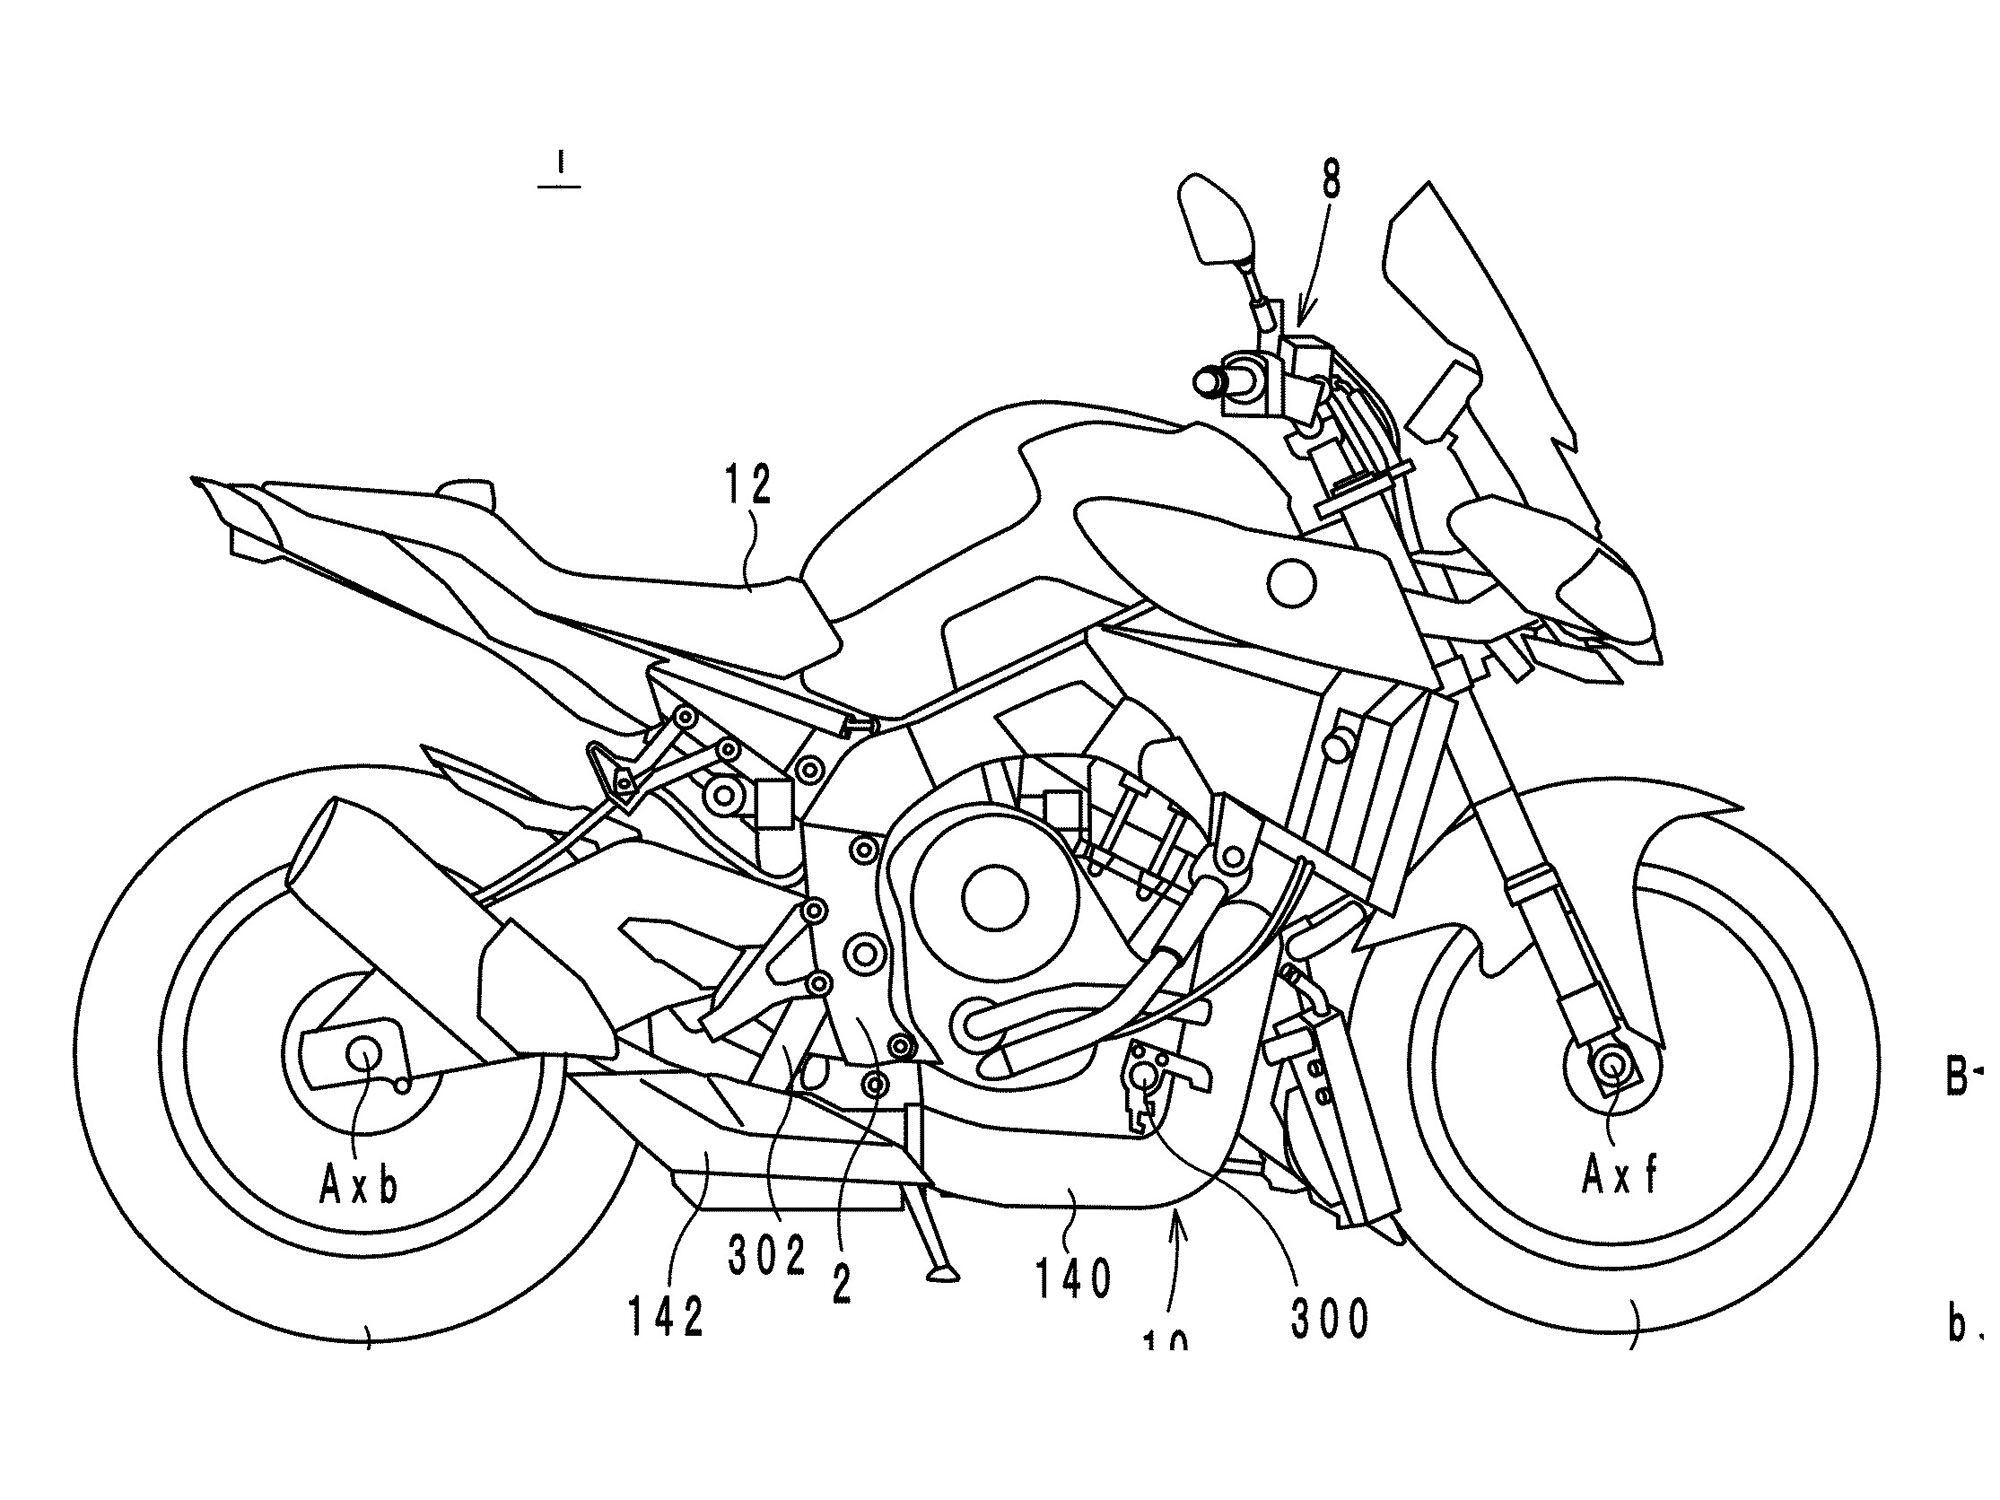 New patents show Yamaha is still heavily involved in its turbocharged triple-cylinder bike project.